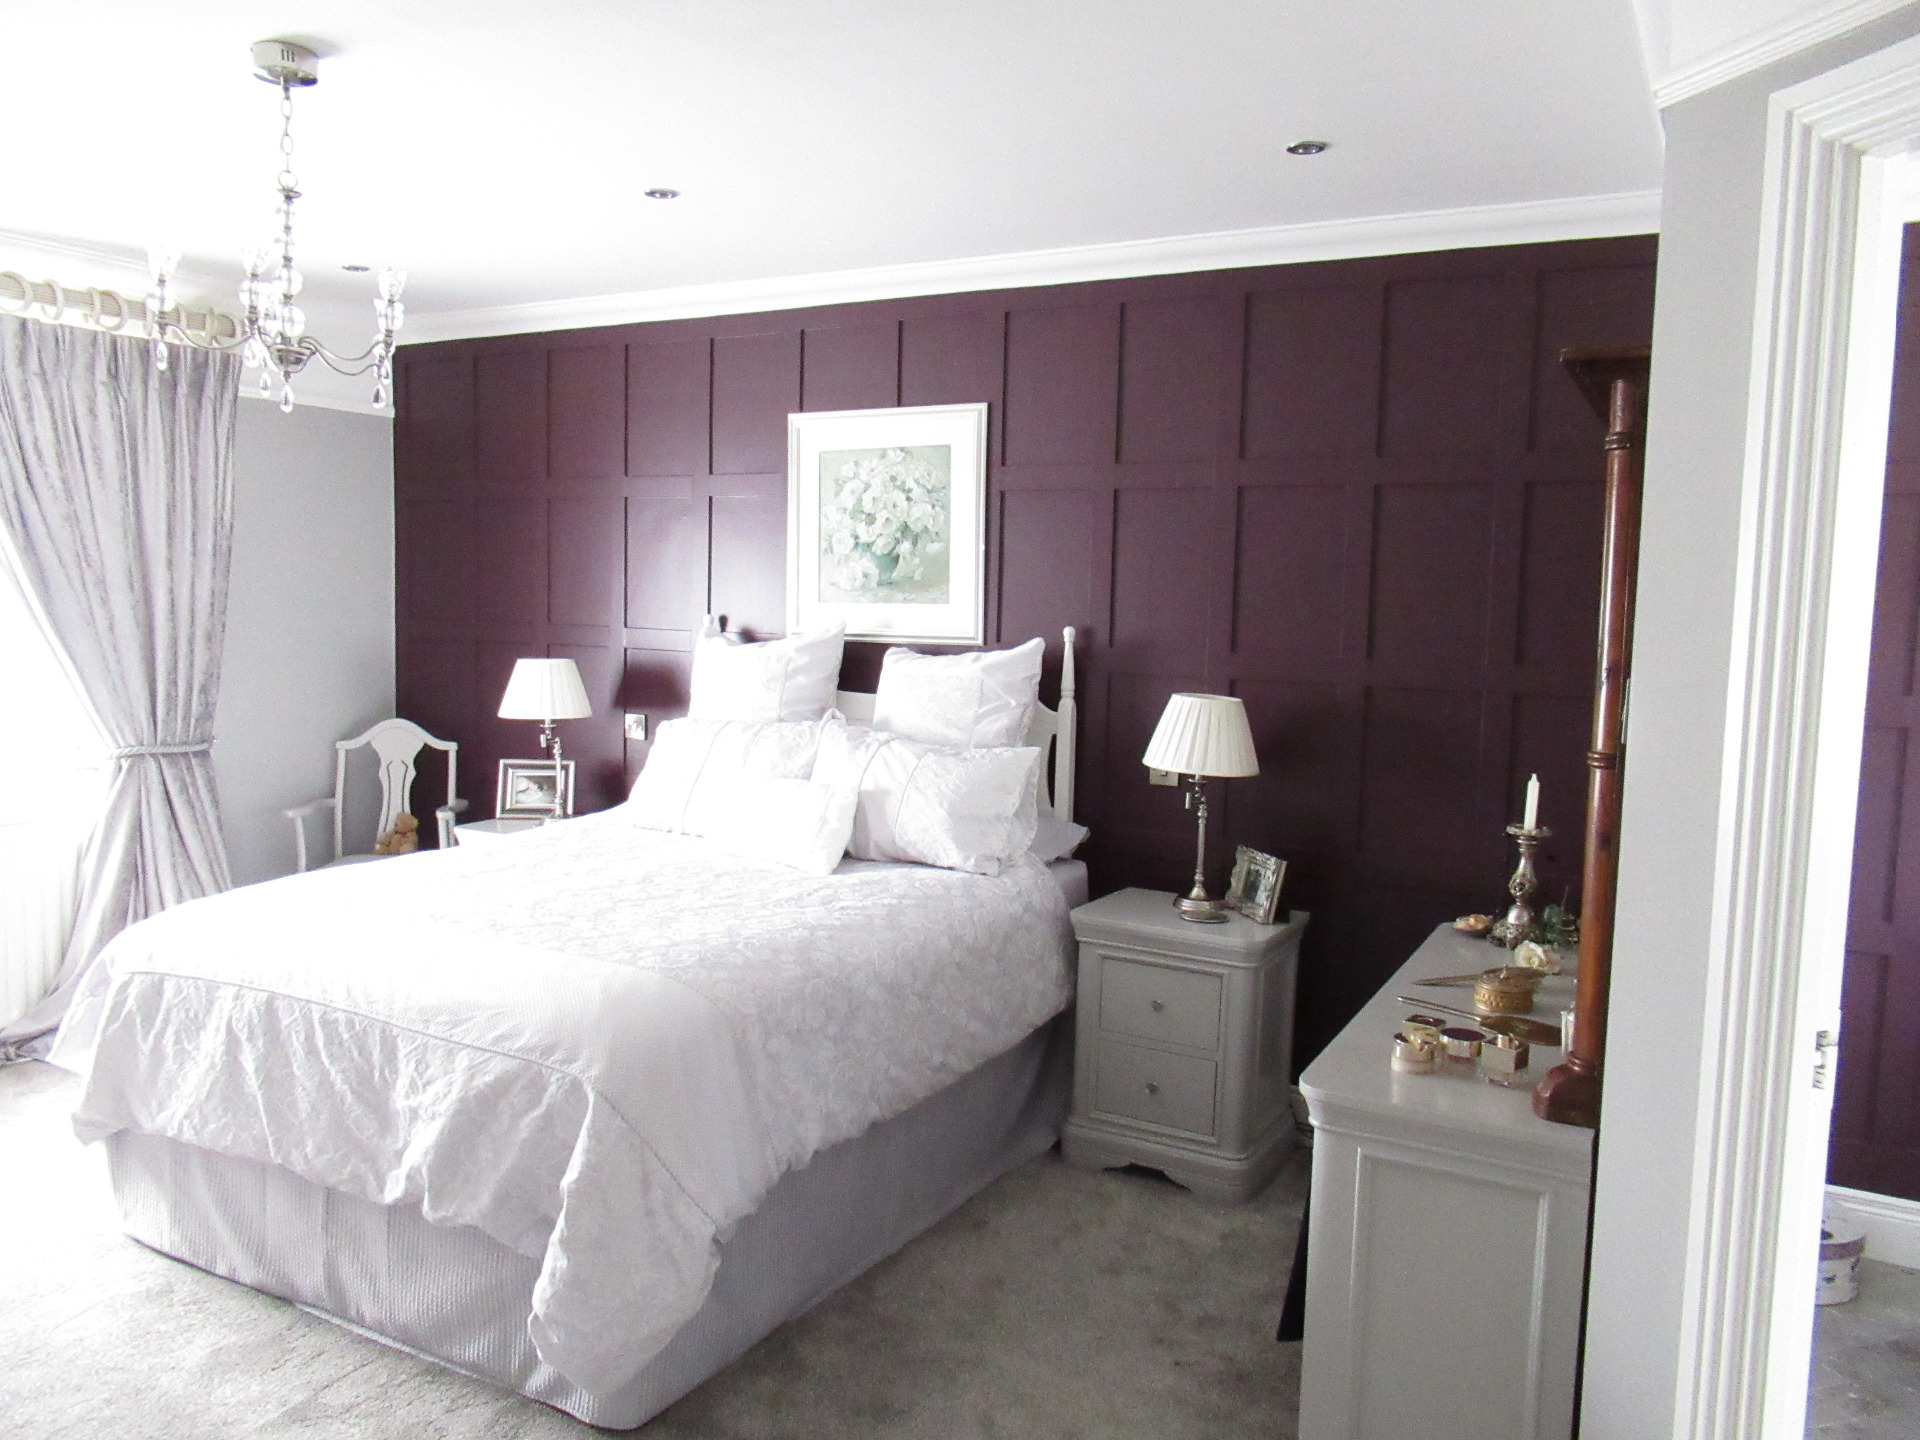 Floor to ceiling bedroom wall panelling installed by Elite Building Services Swords